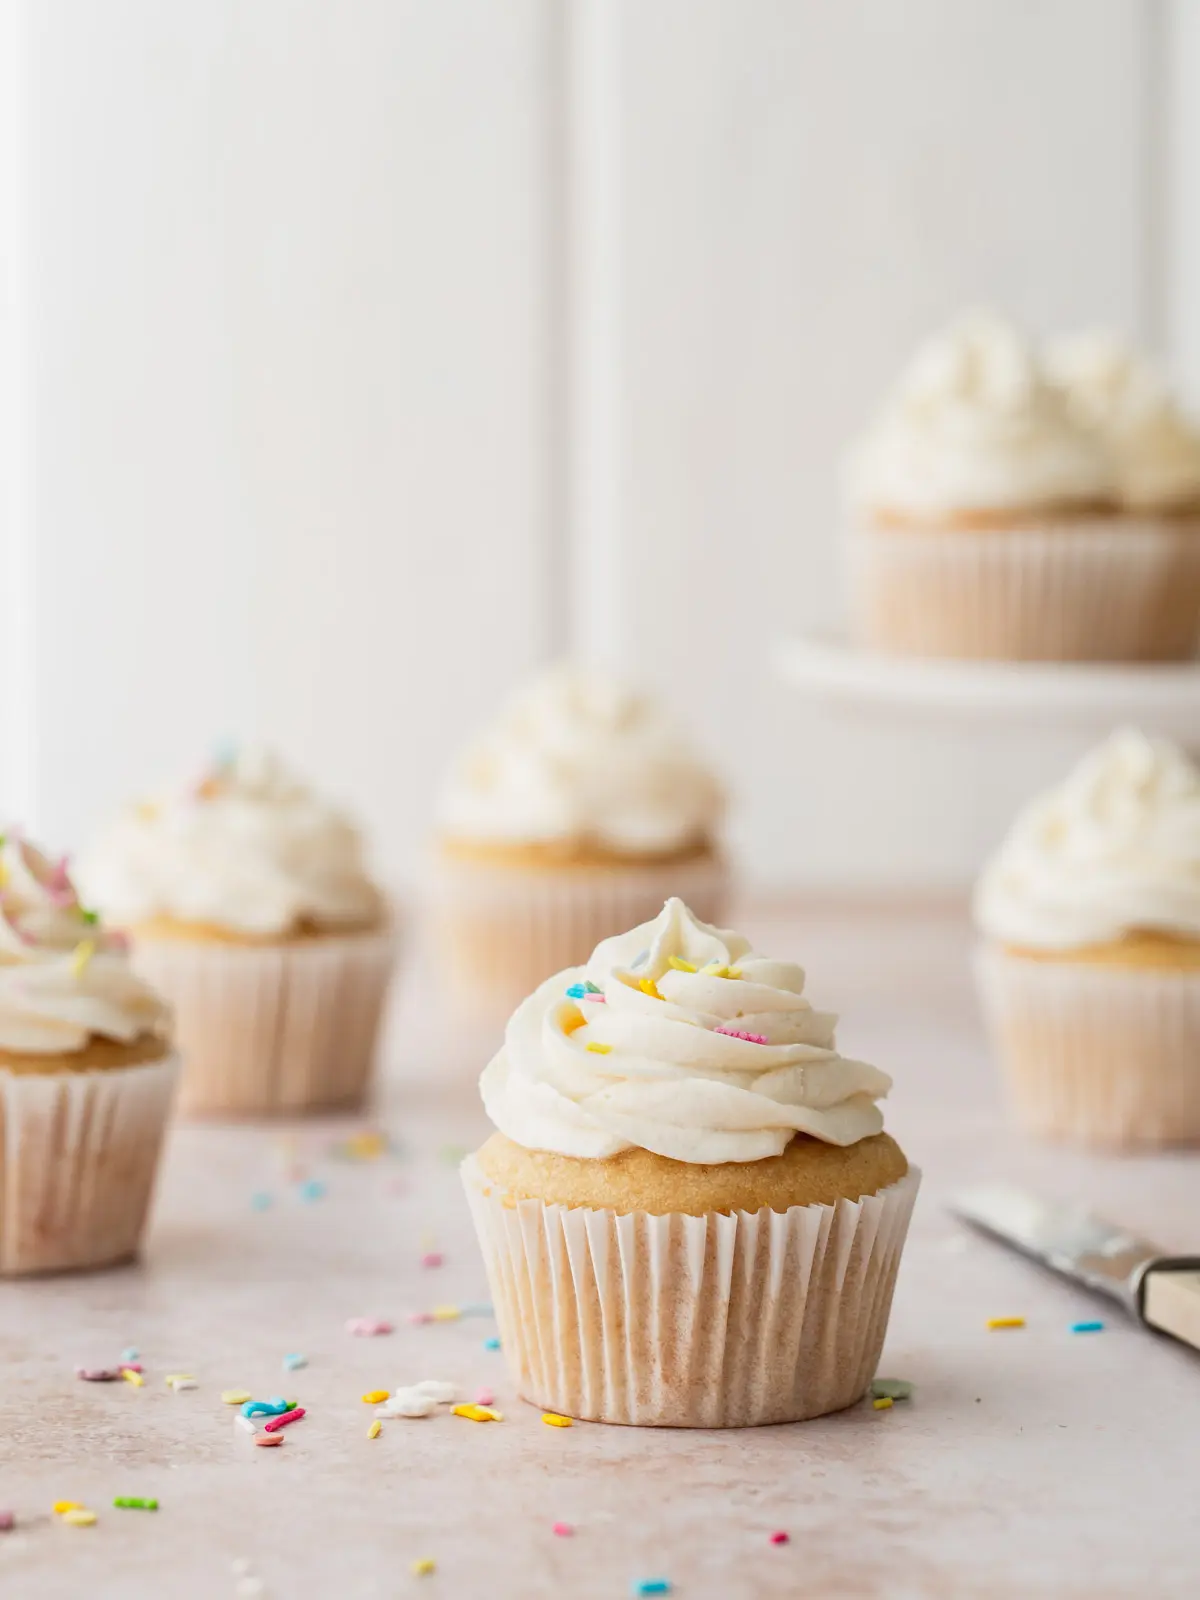 Frosted vanilla cupcakes with sprinkles.